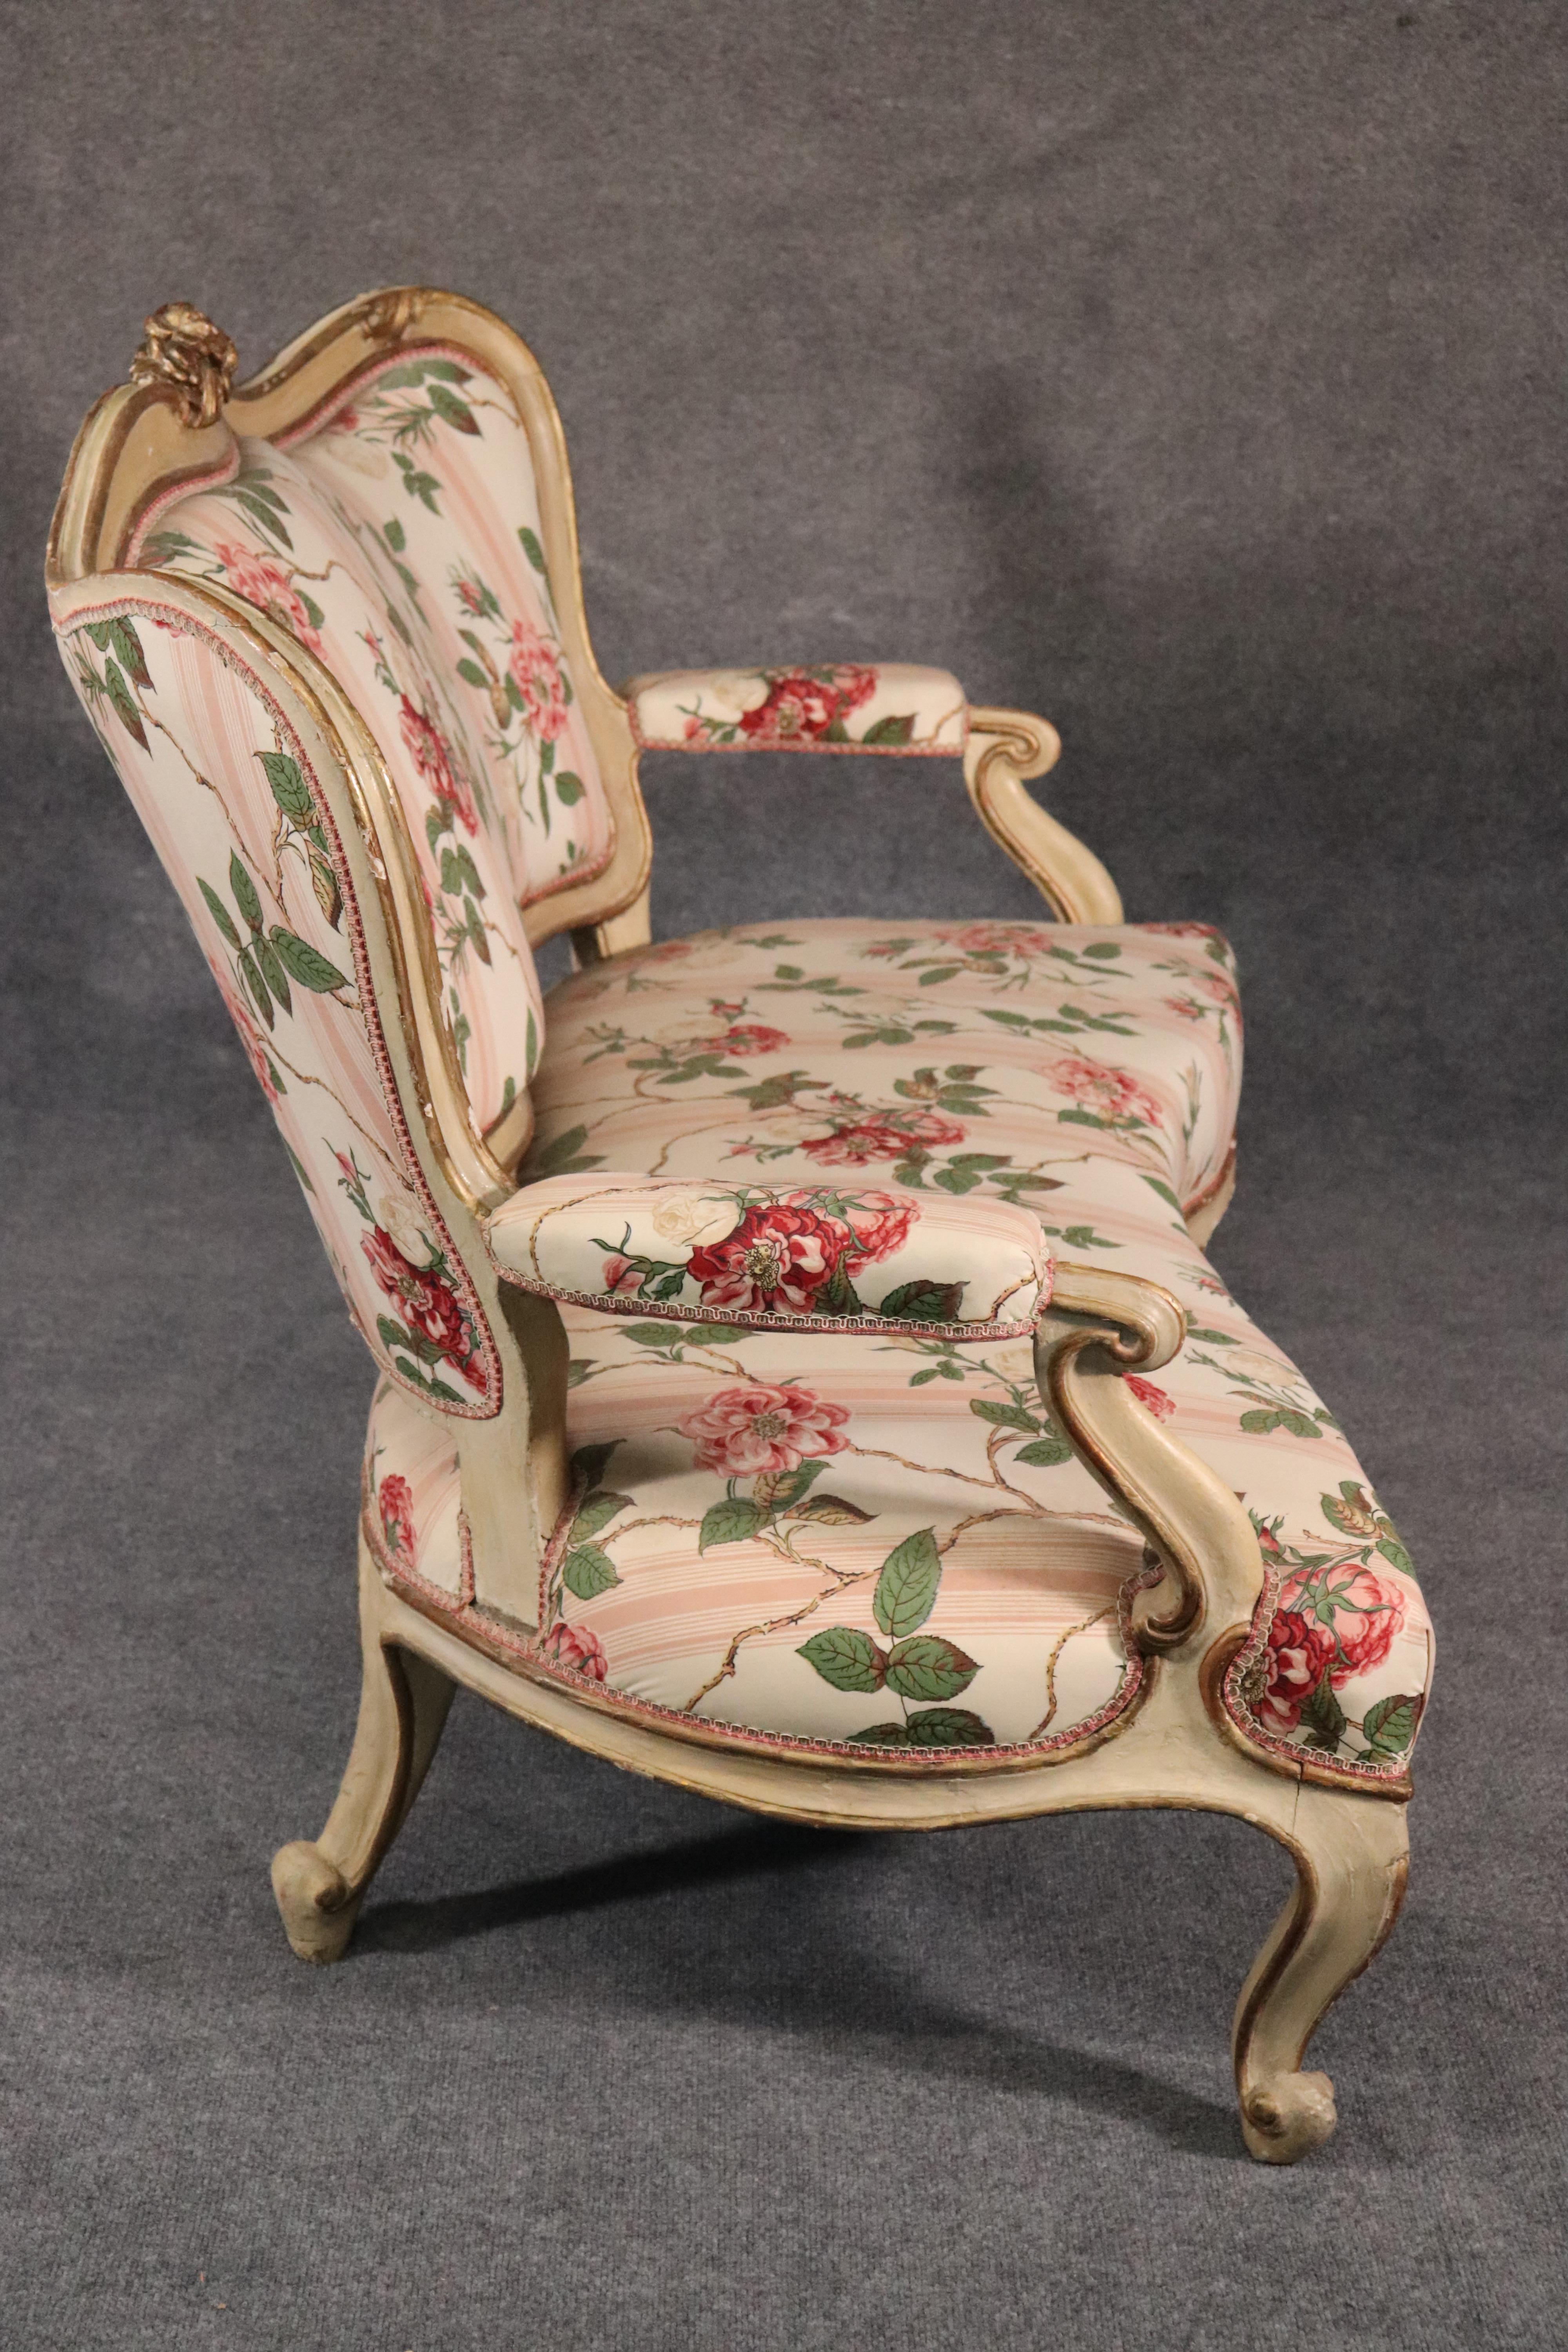 Late 19th Century Painted Floral French Rococo Carved Settee Canape Sofa, circa 1890s